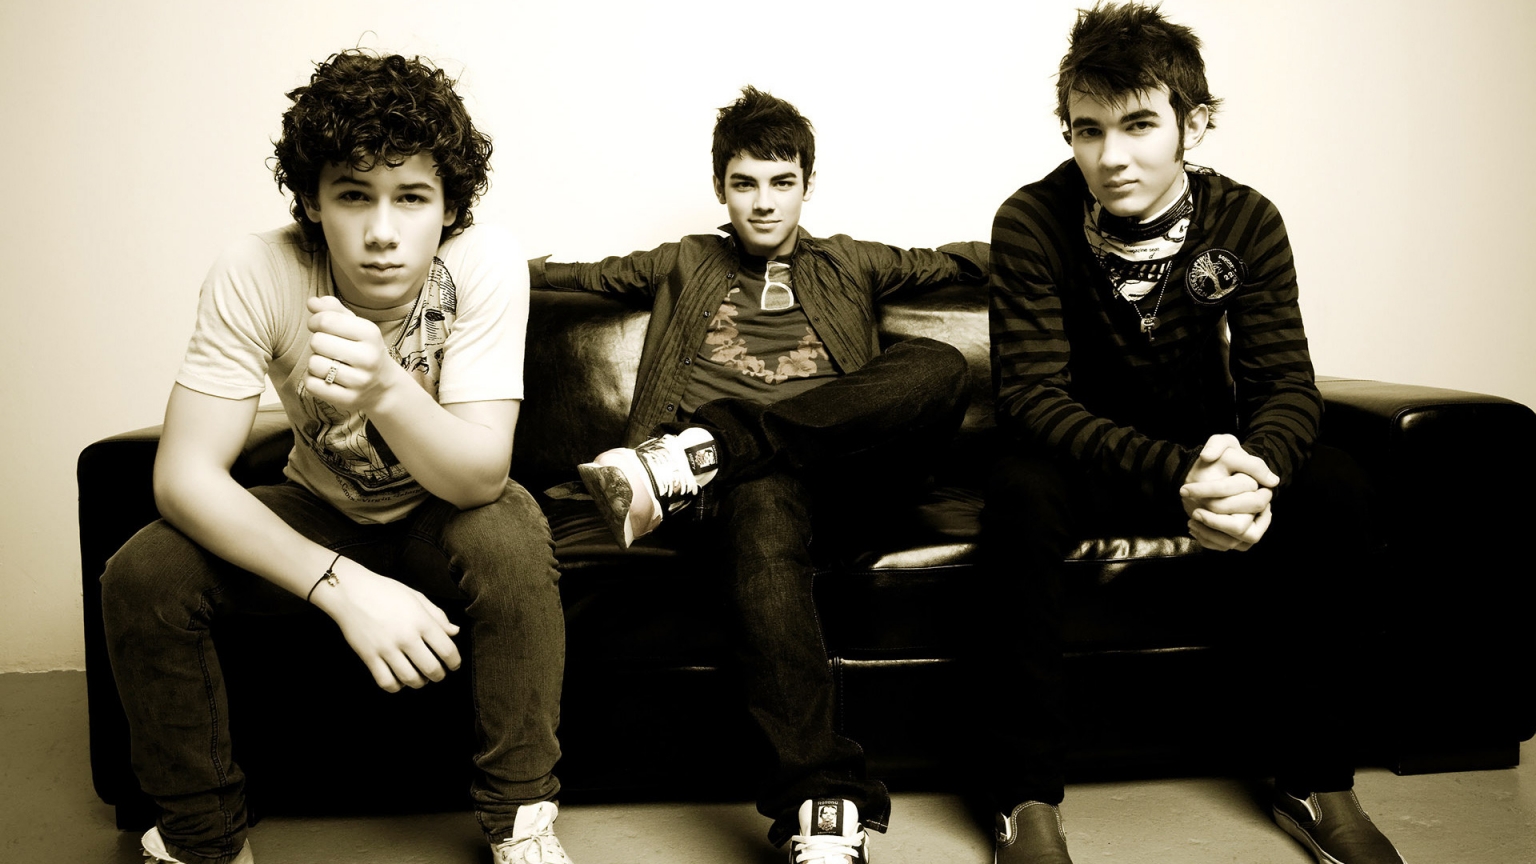 Jonas Brothers Recording Artists for 1536 x 864 HDTV resolution